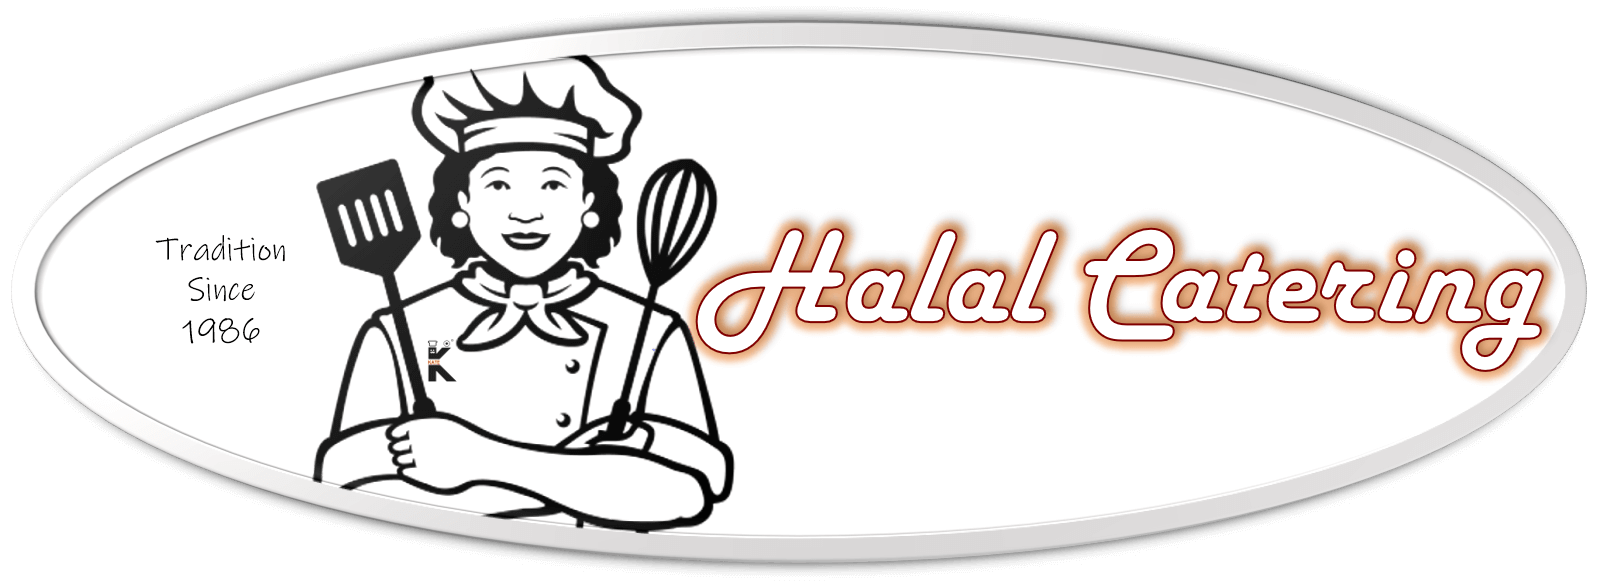 Kate's Halal Catering